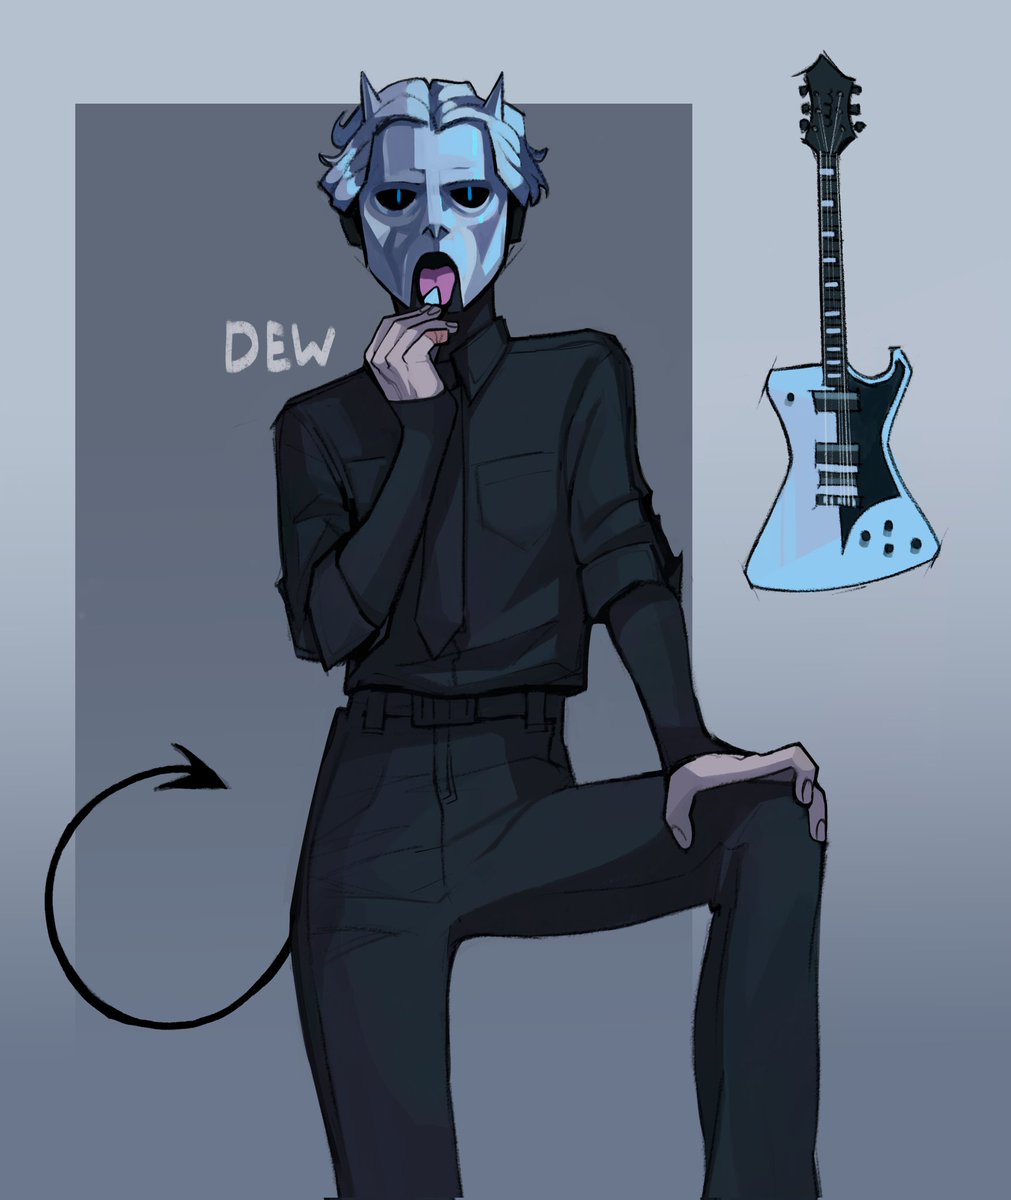 he said he's too old and fragile
#thebandghost #sodoghoul #dewdropghoul